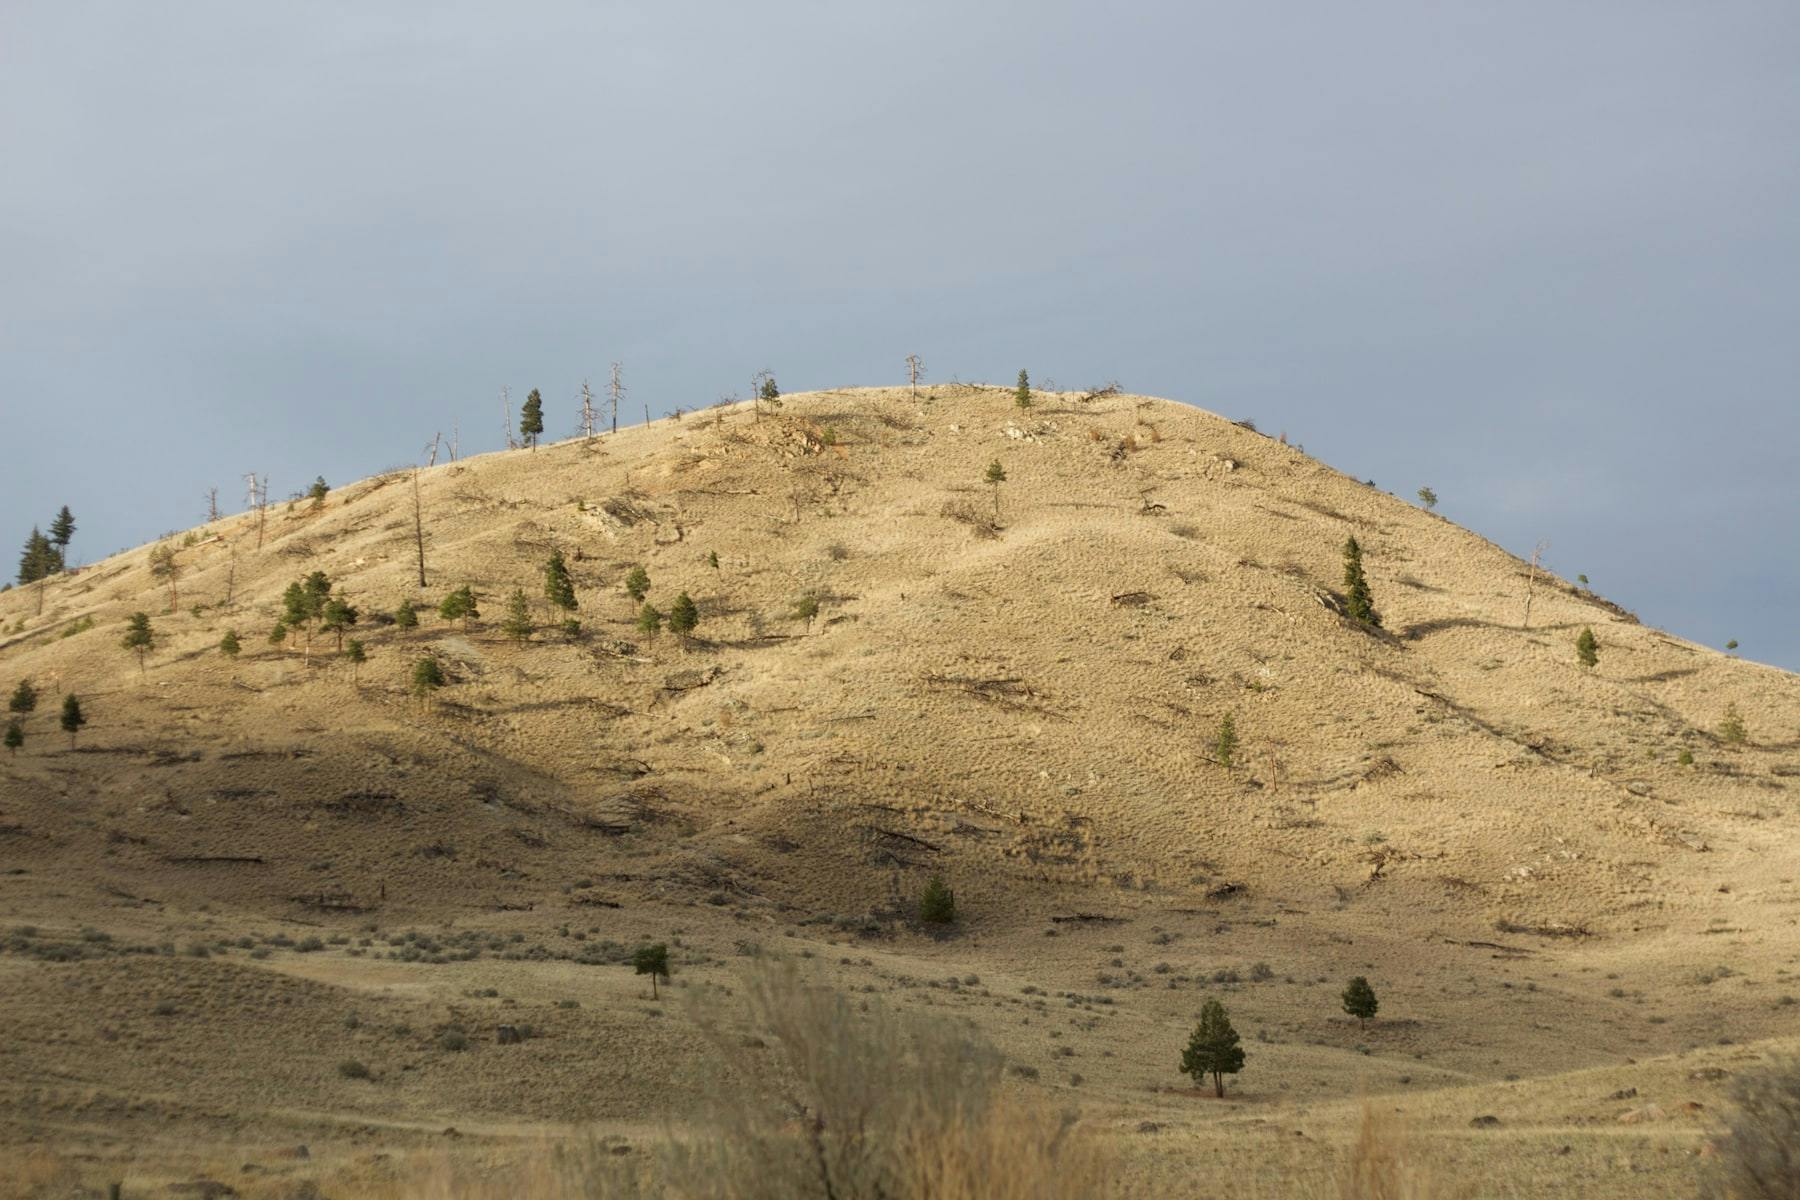 A hill in the grasslands